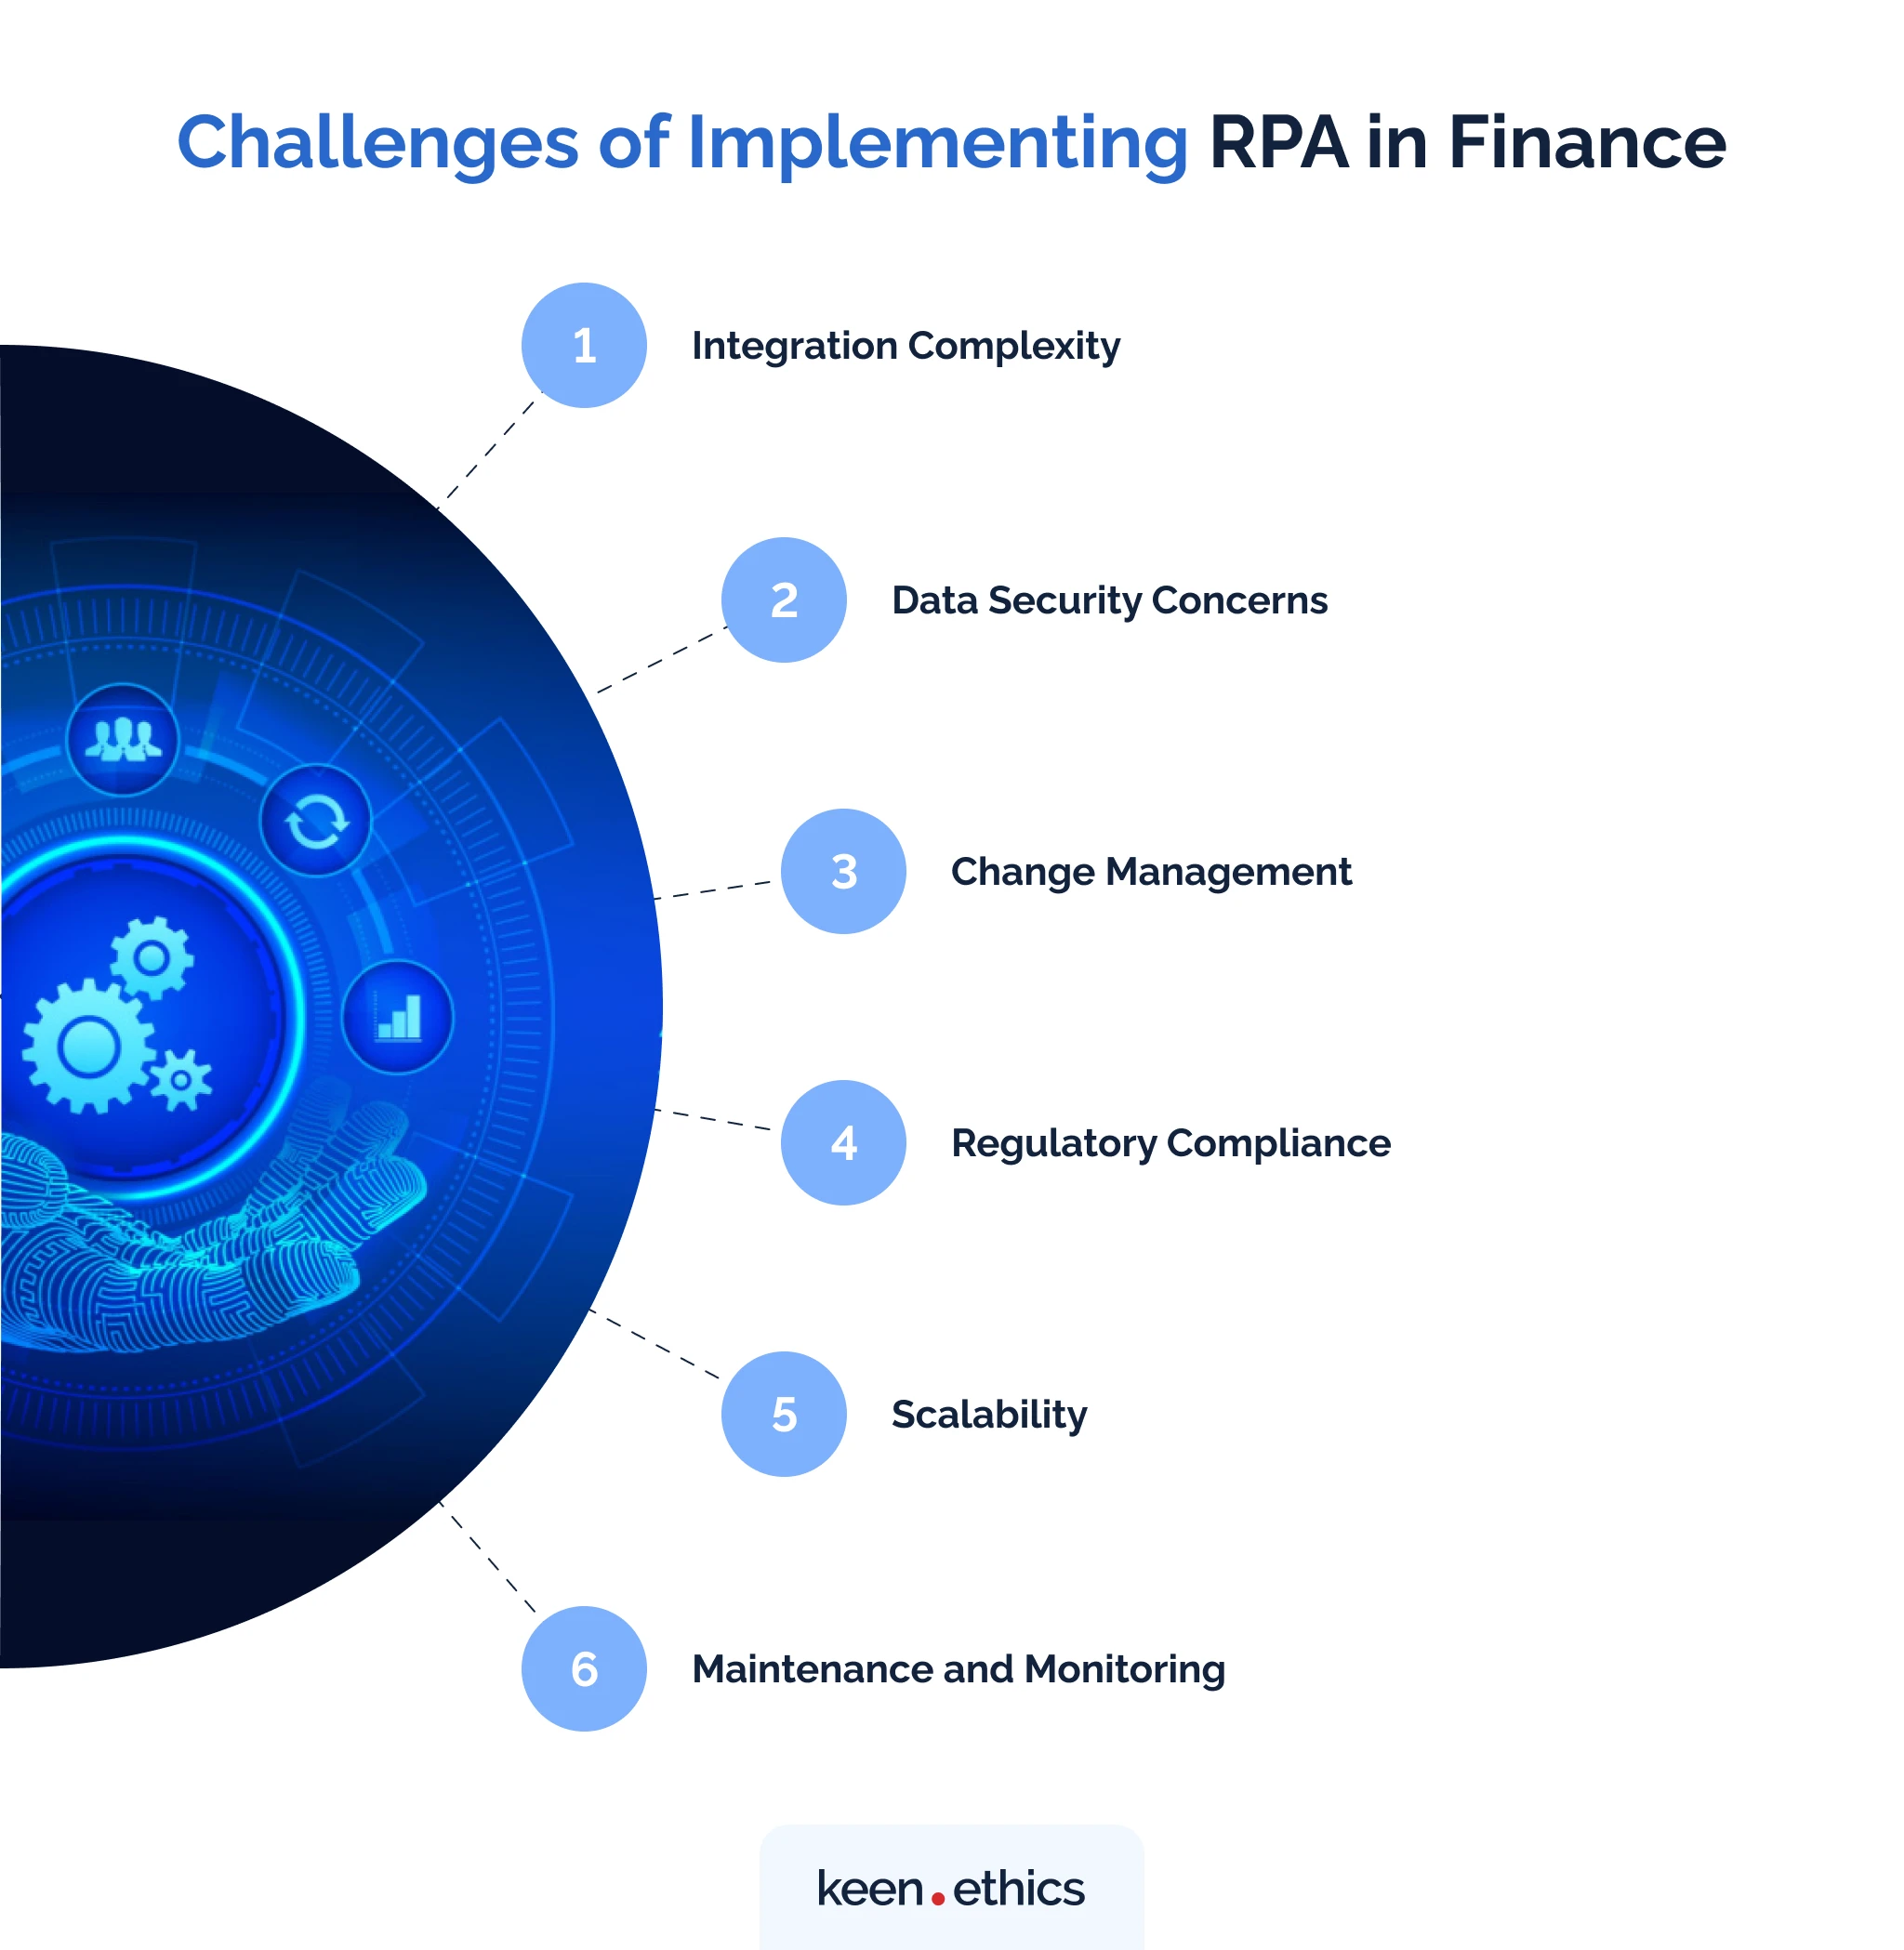 Challenges of implementing RPA in finance